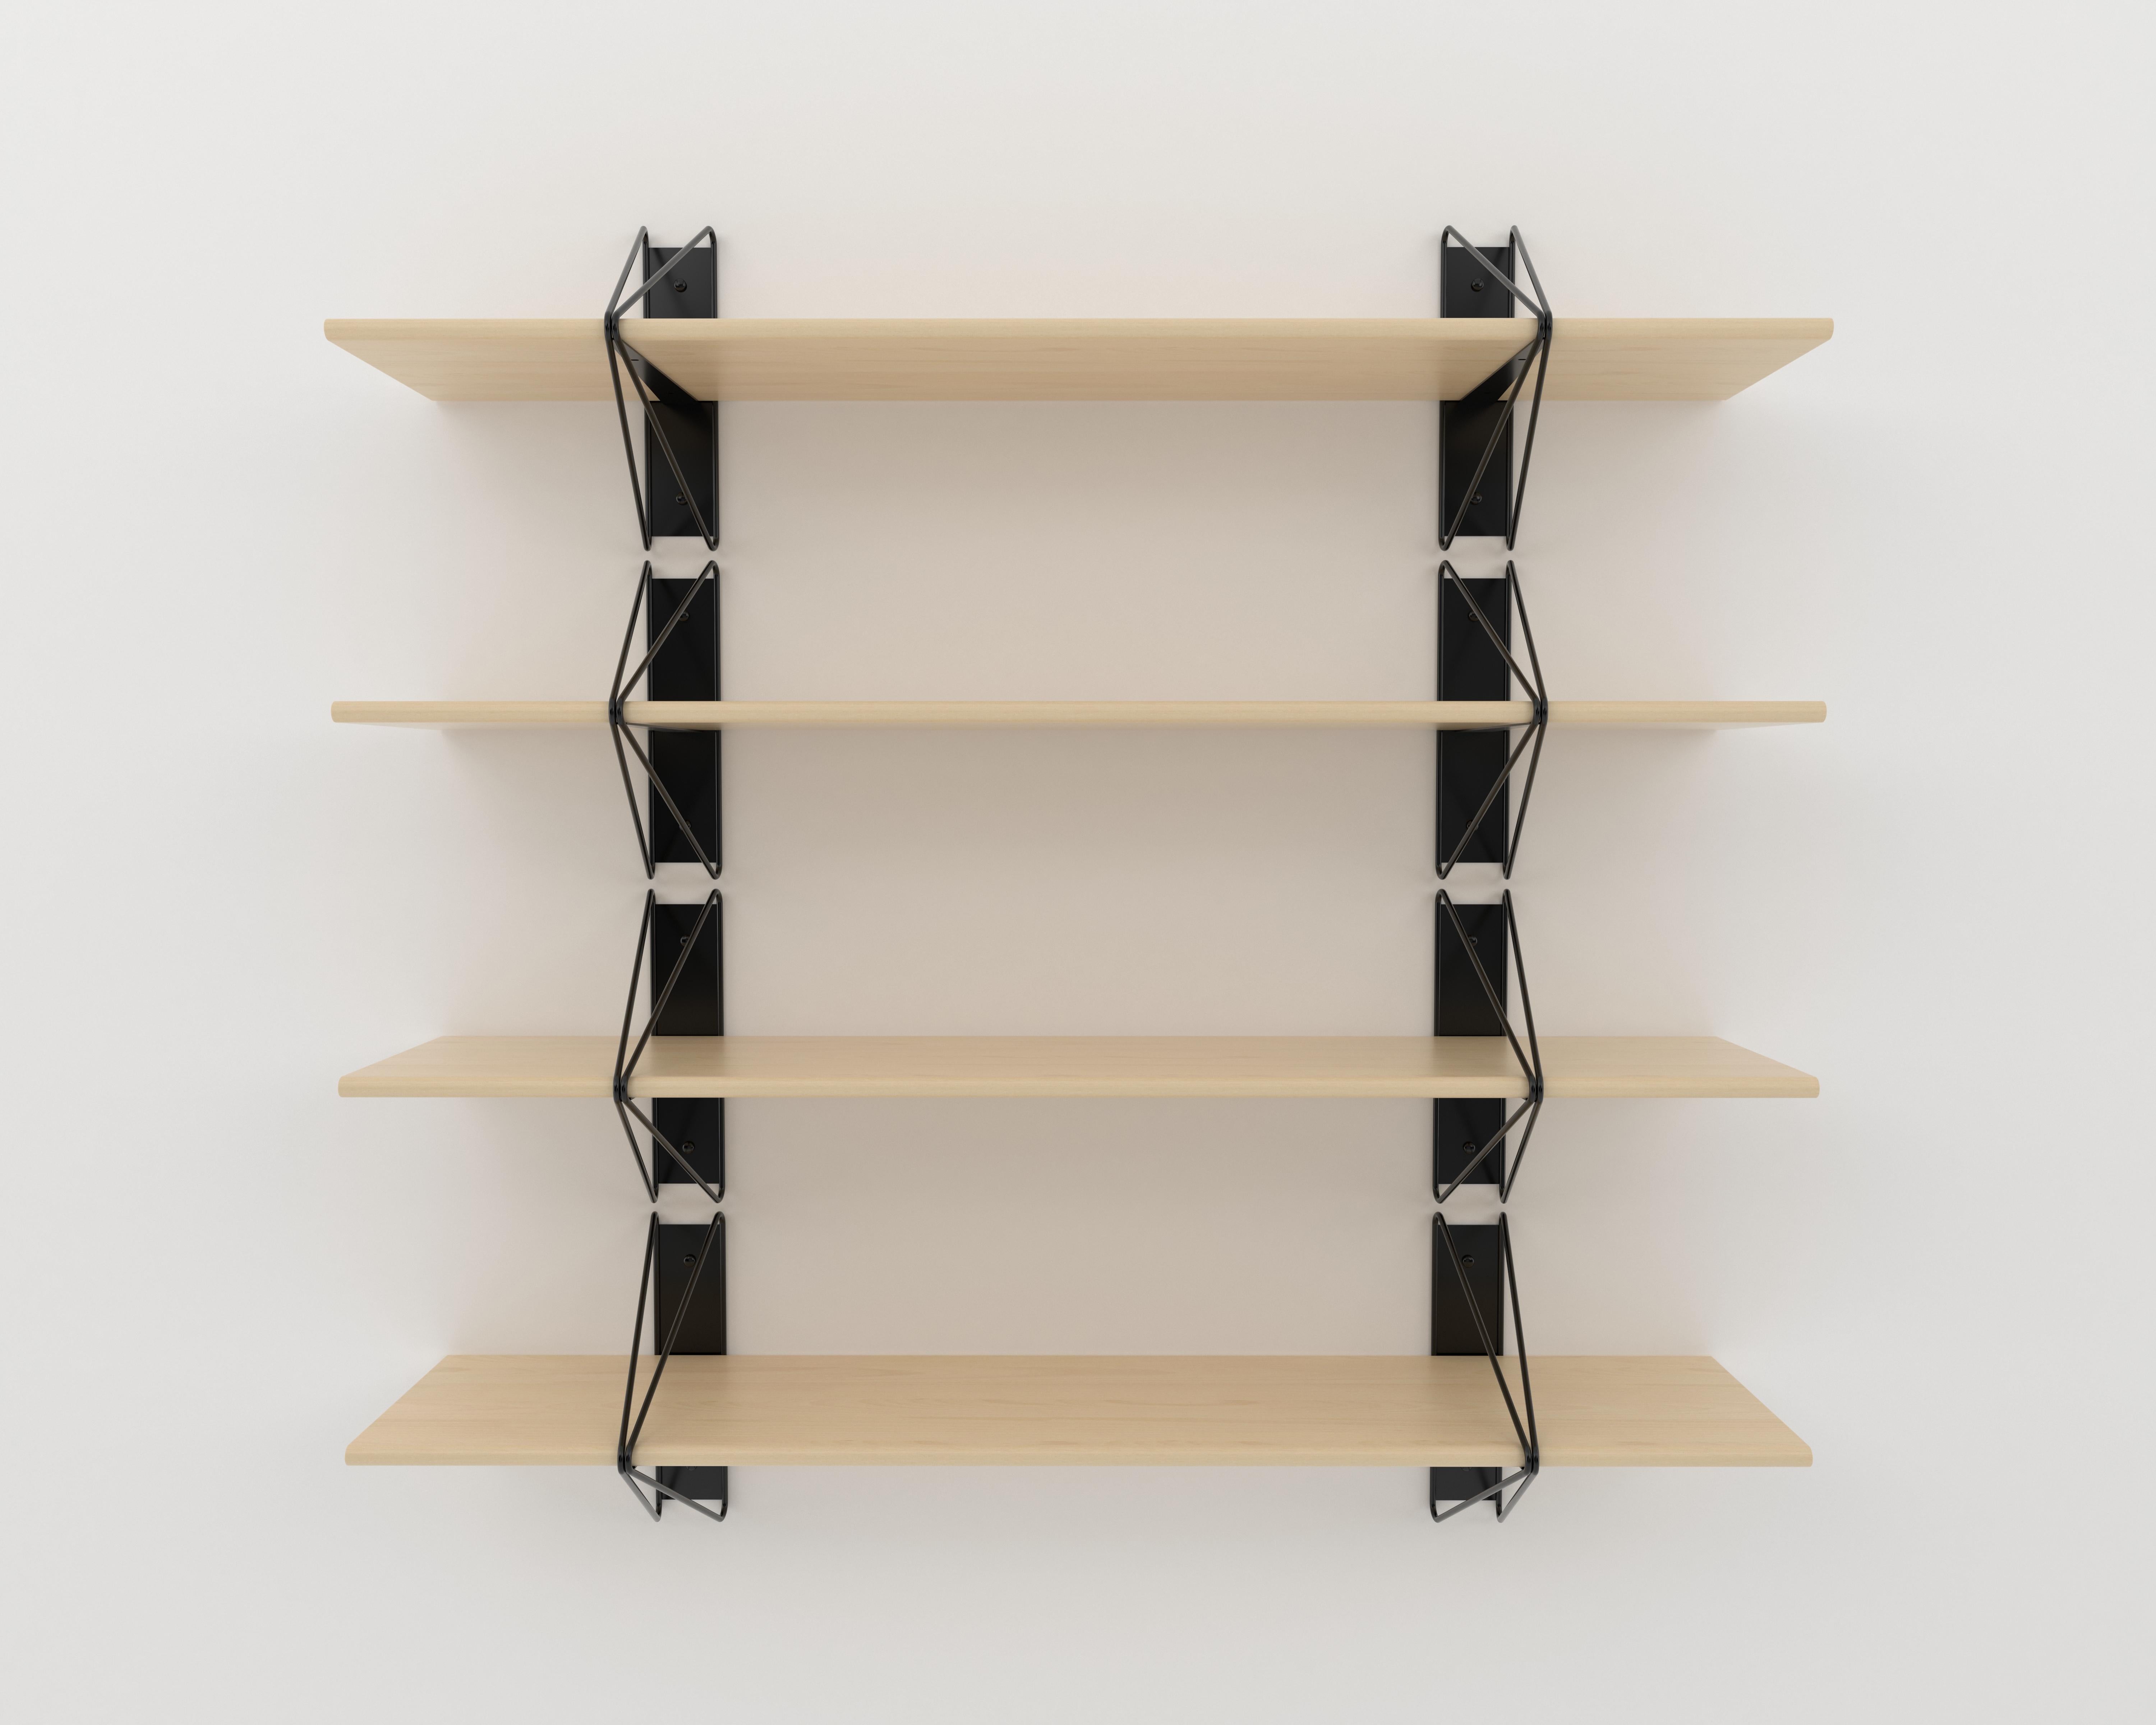 American Set of 5 Strut Shelves from Souda, Black and Maple, Made to Order For Sale